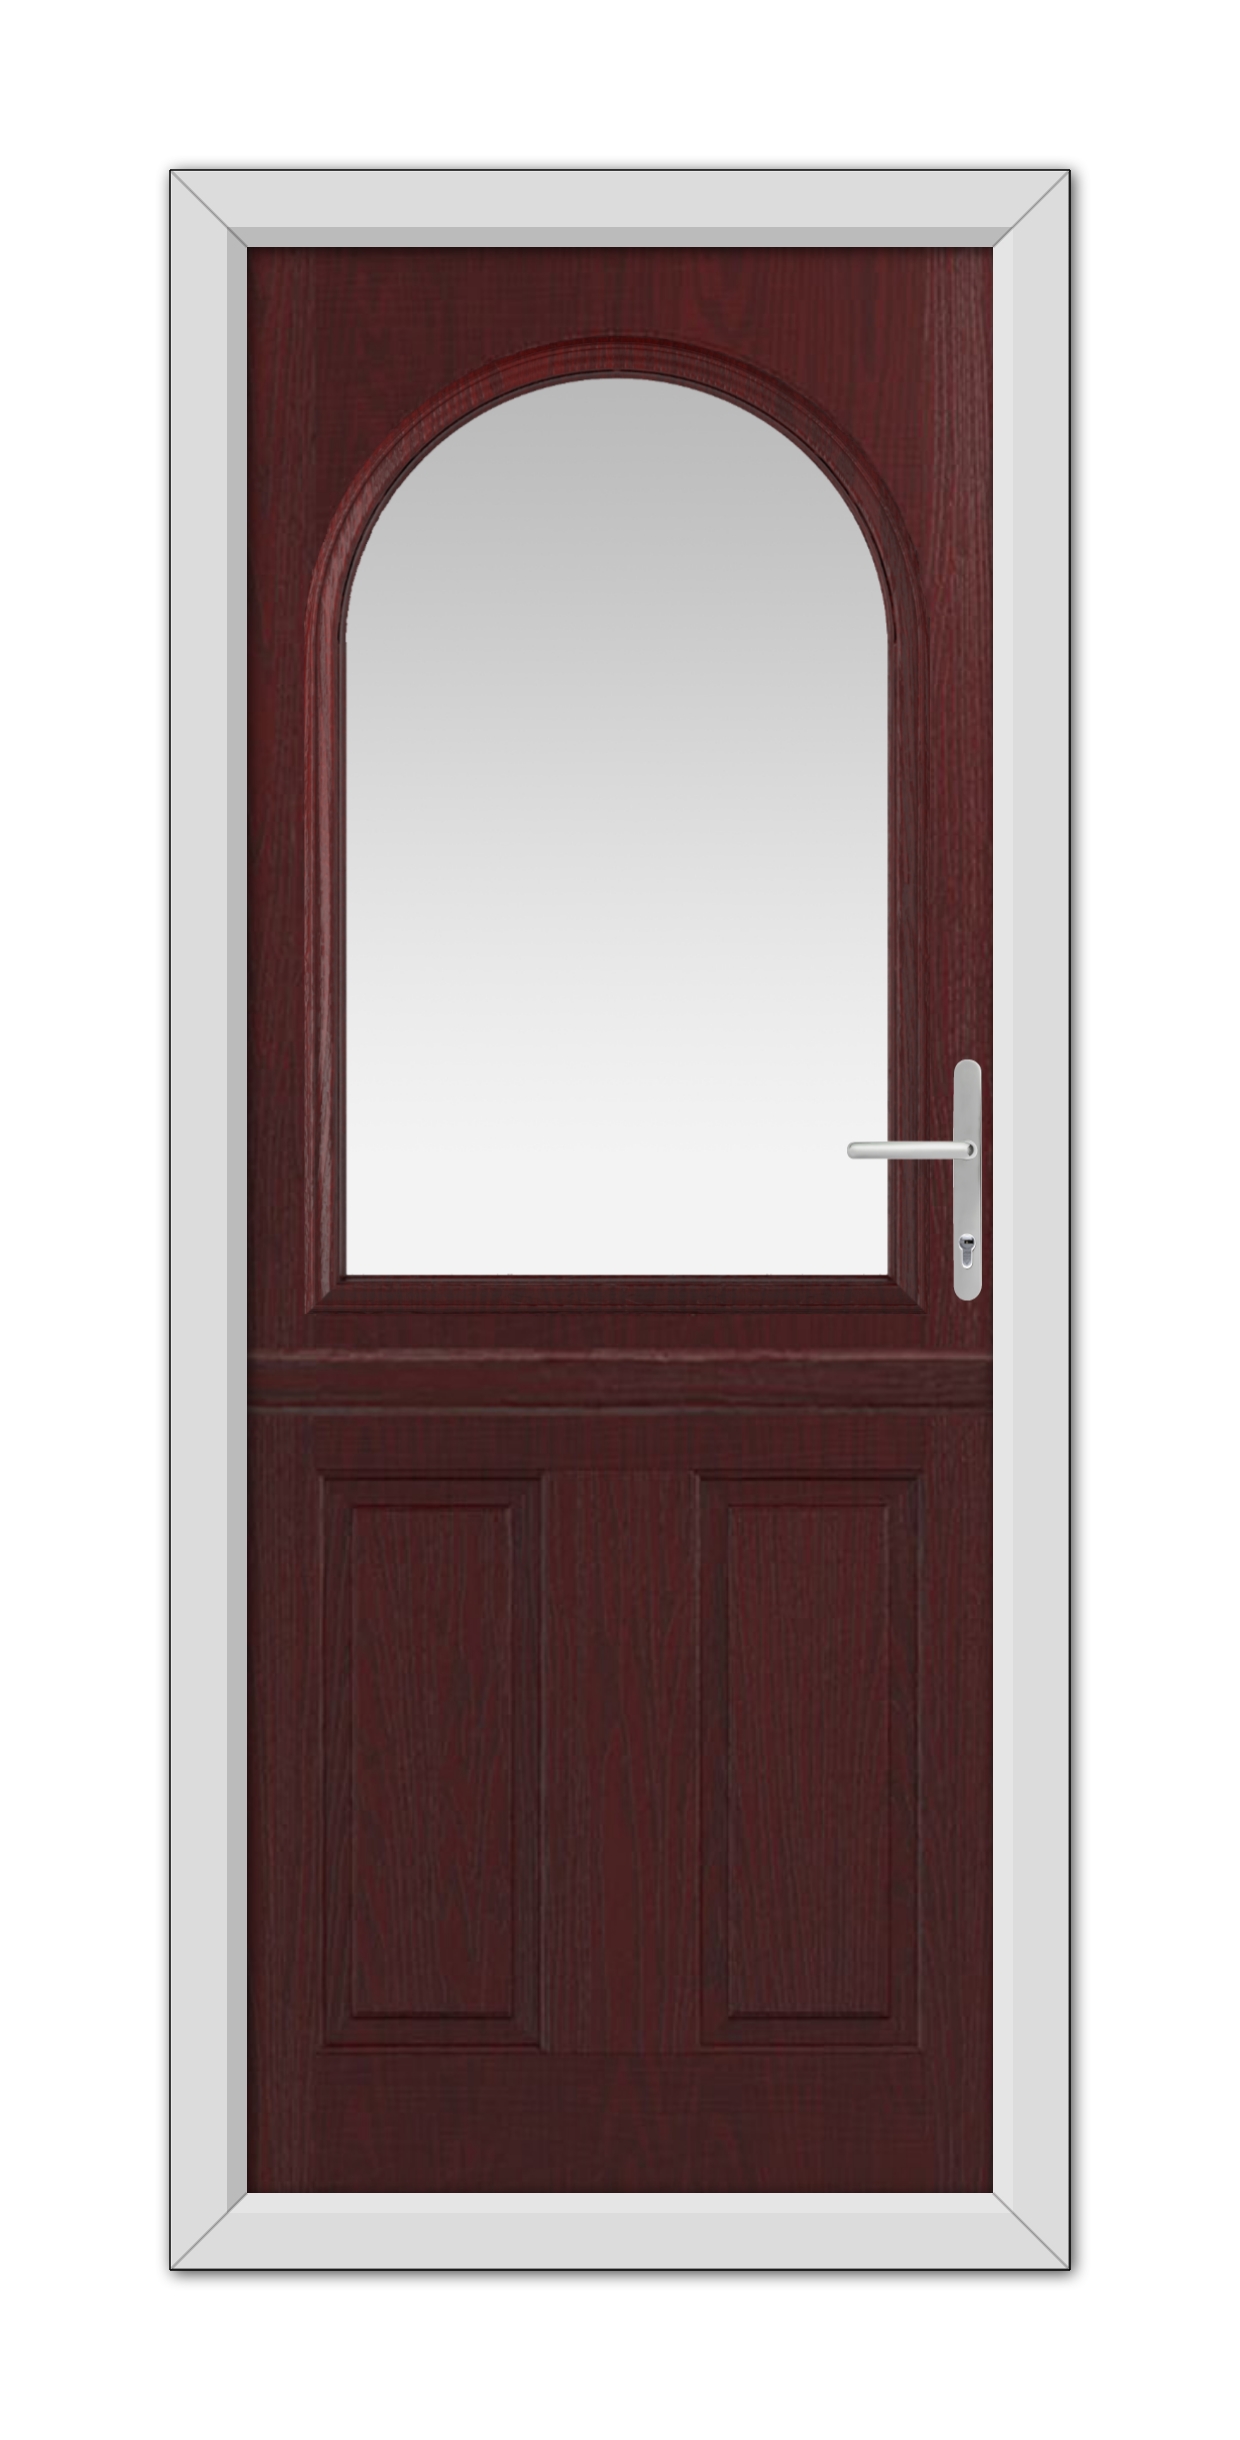 A closed Rosewood Grafton Stable Composite Door with an arched top window, featuring a white frame and a modern handle, isolated on a white background.